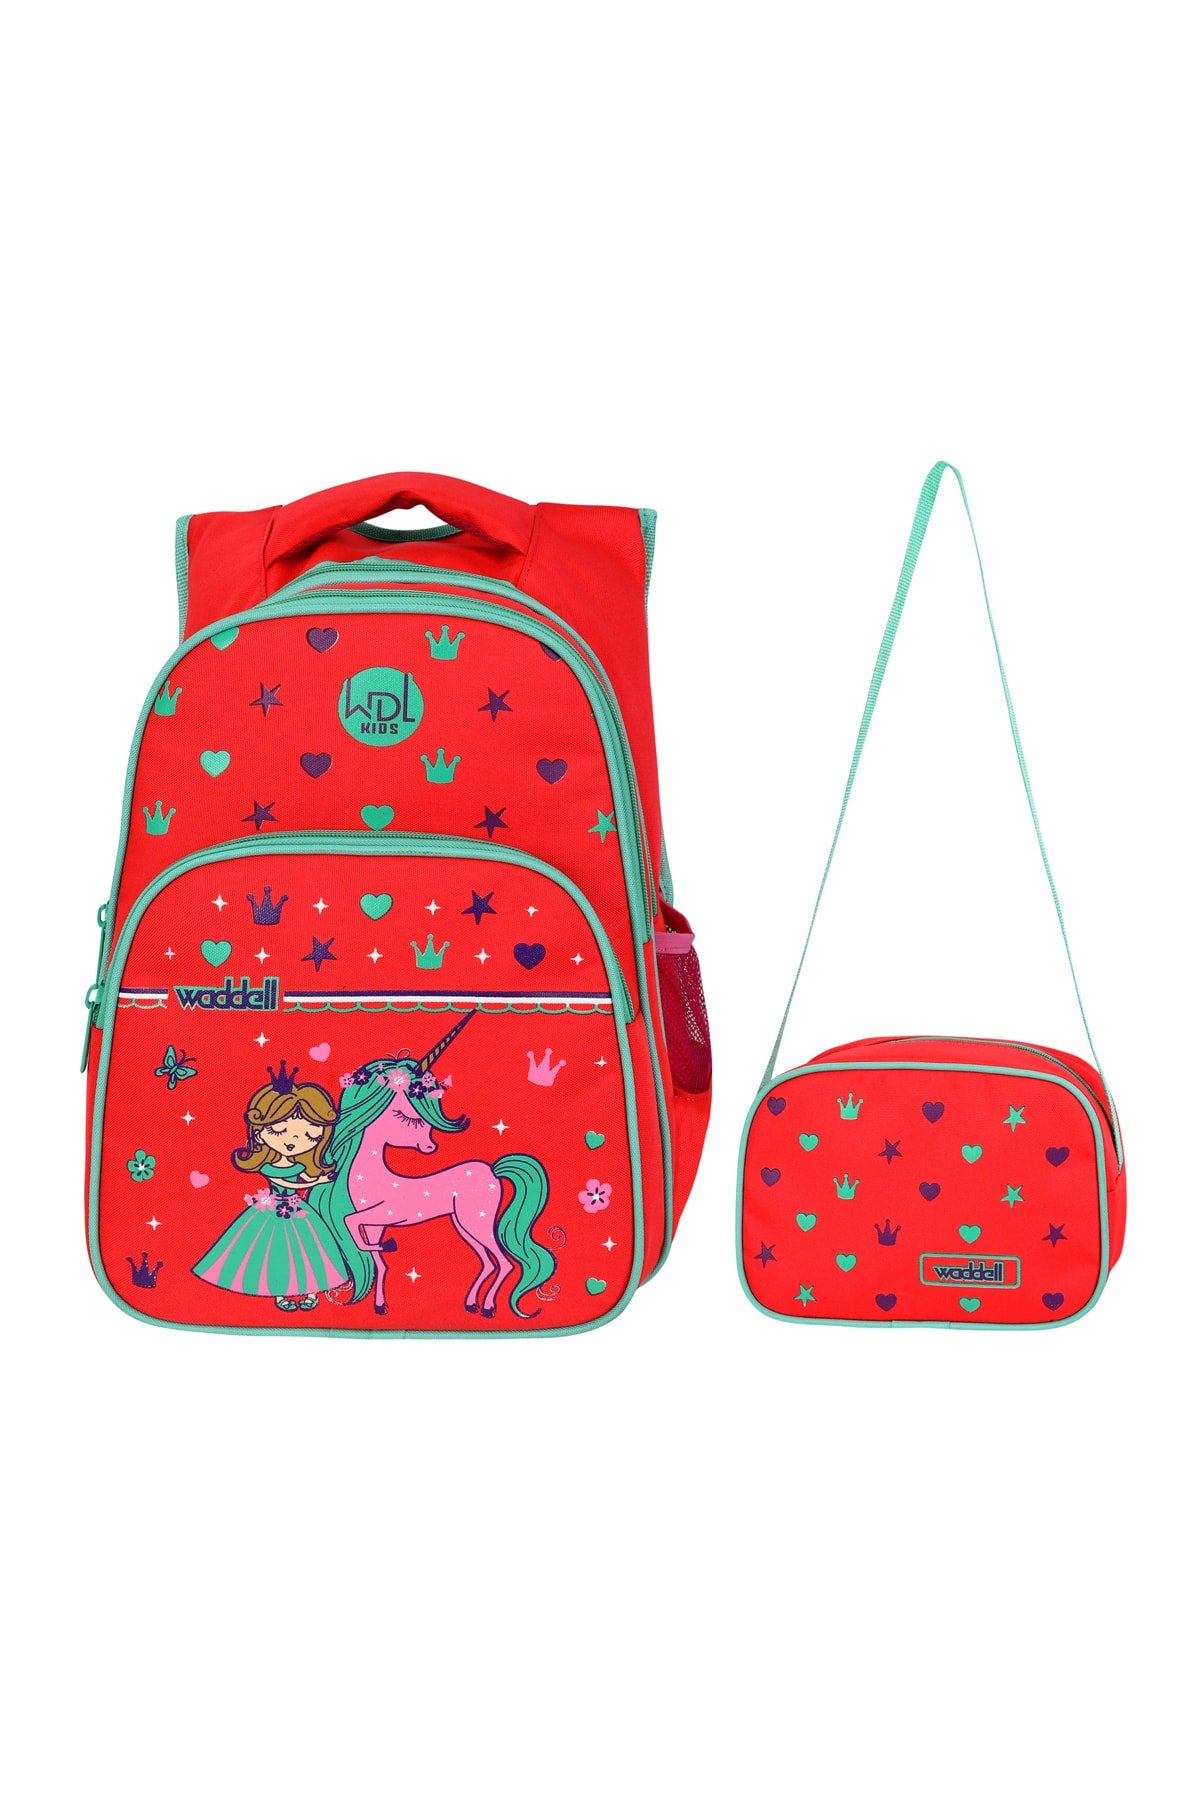 Licensed Coral Princess Patterned Primary School Backpack And Lunch Box